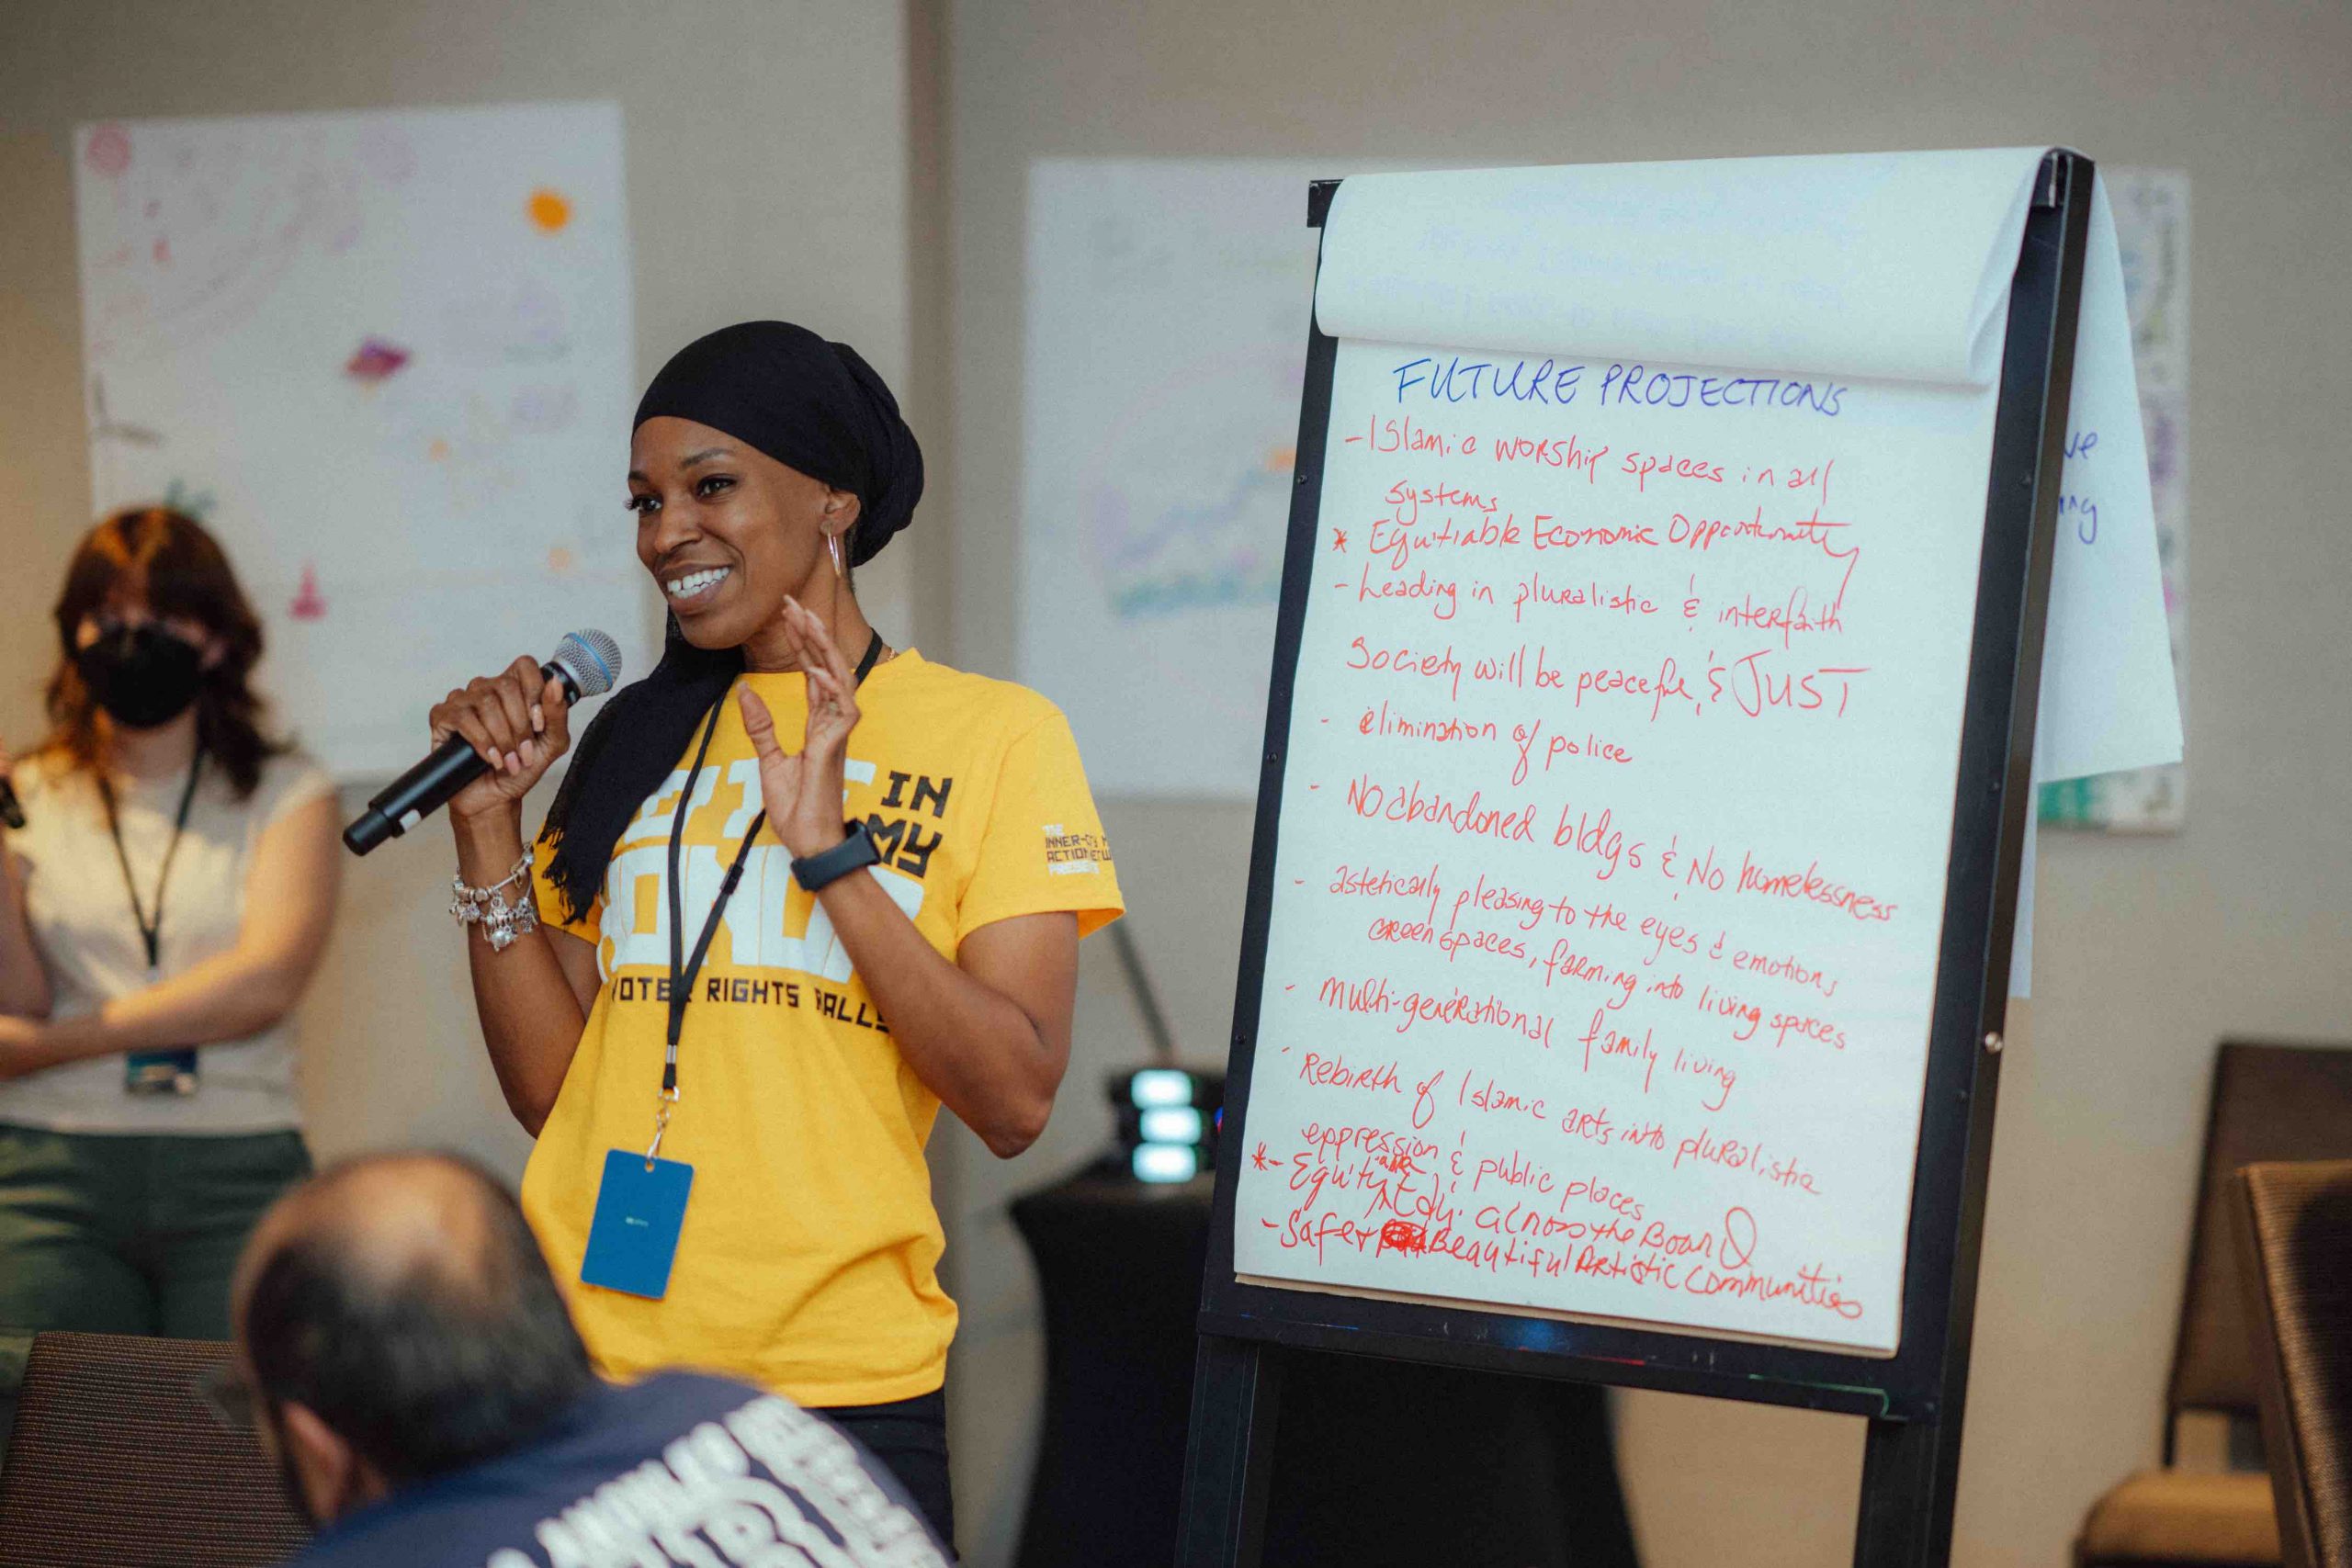 IMAN Atlanta's Kareemah Hanifa speaking into a handheld microphone next to a large easel holding a large sheet of white paper filled with handwritten notes